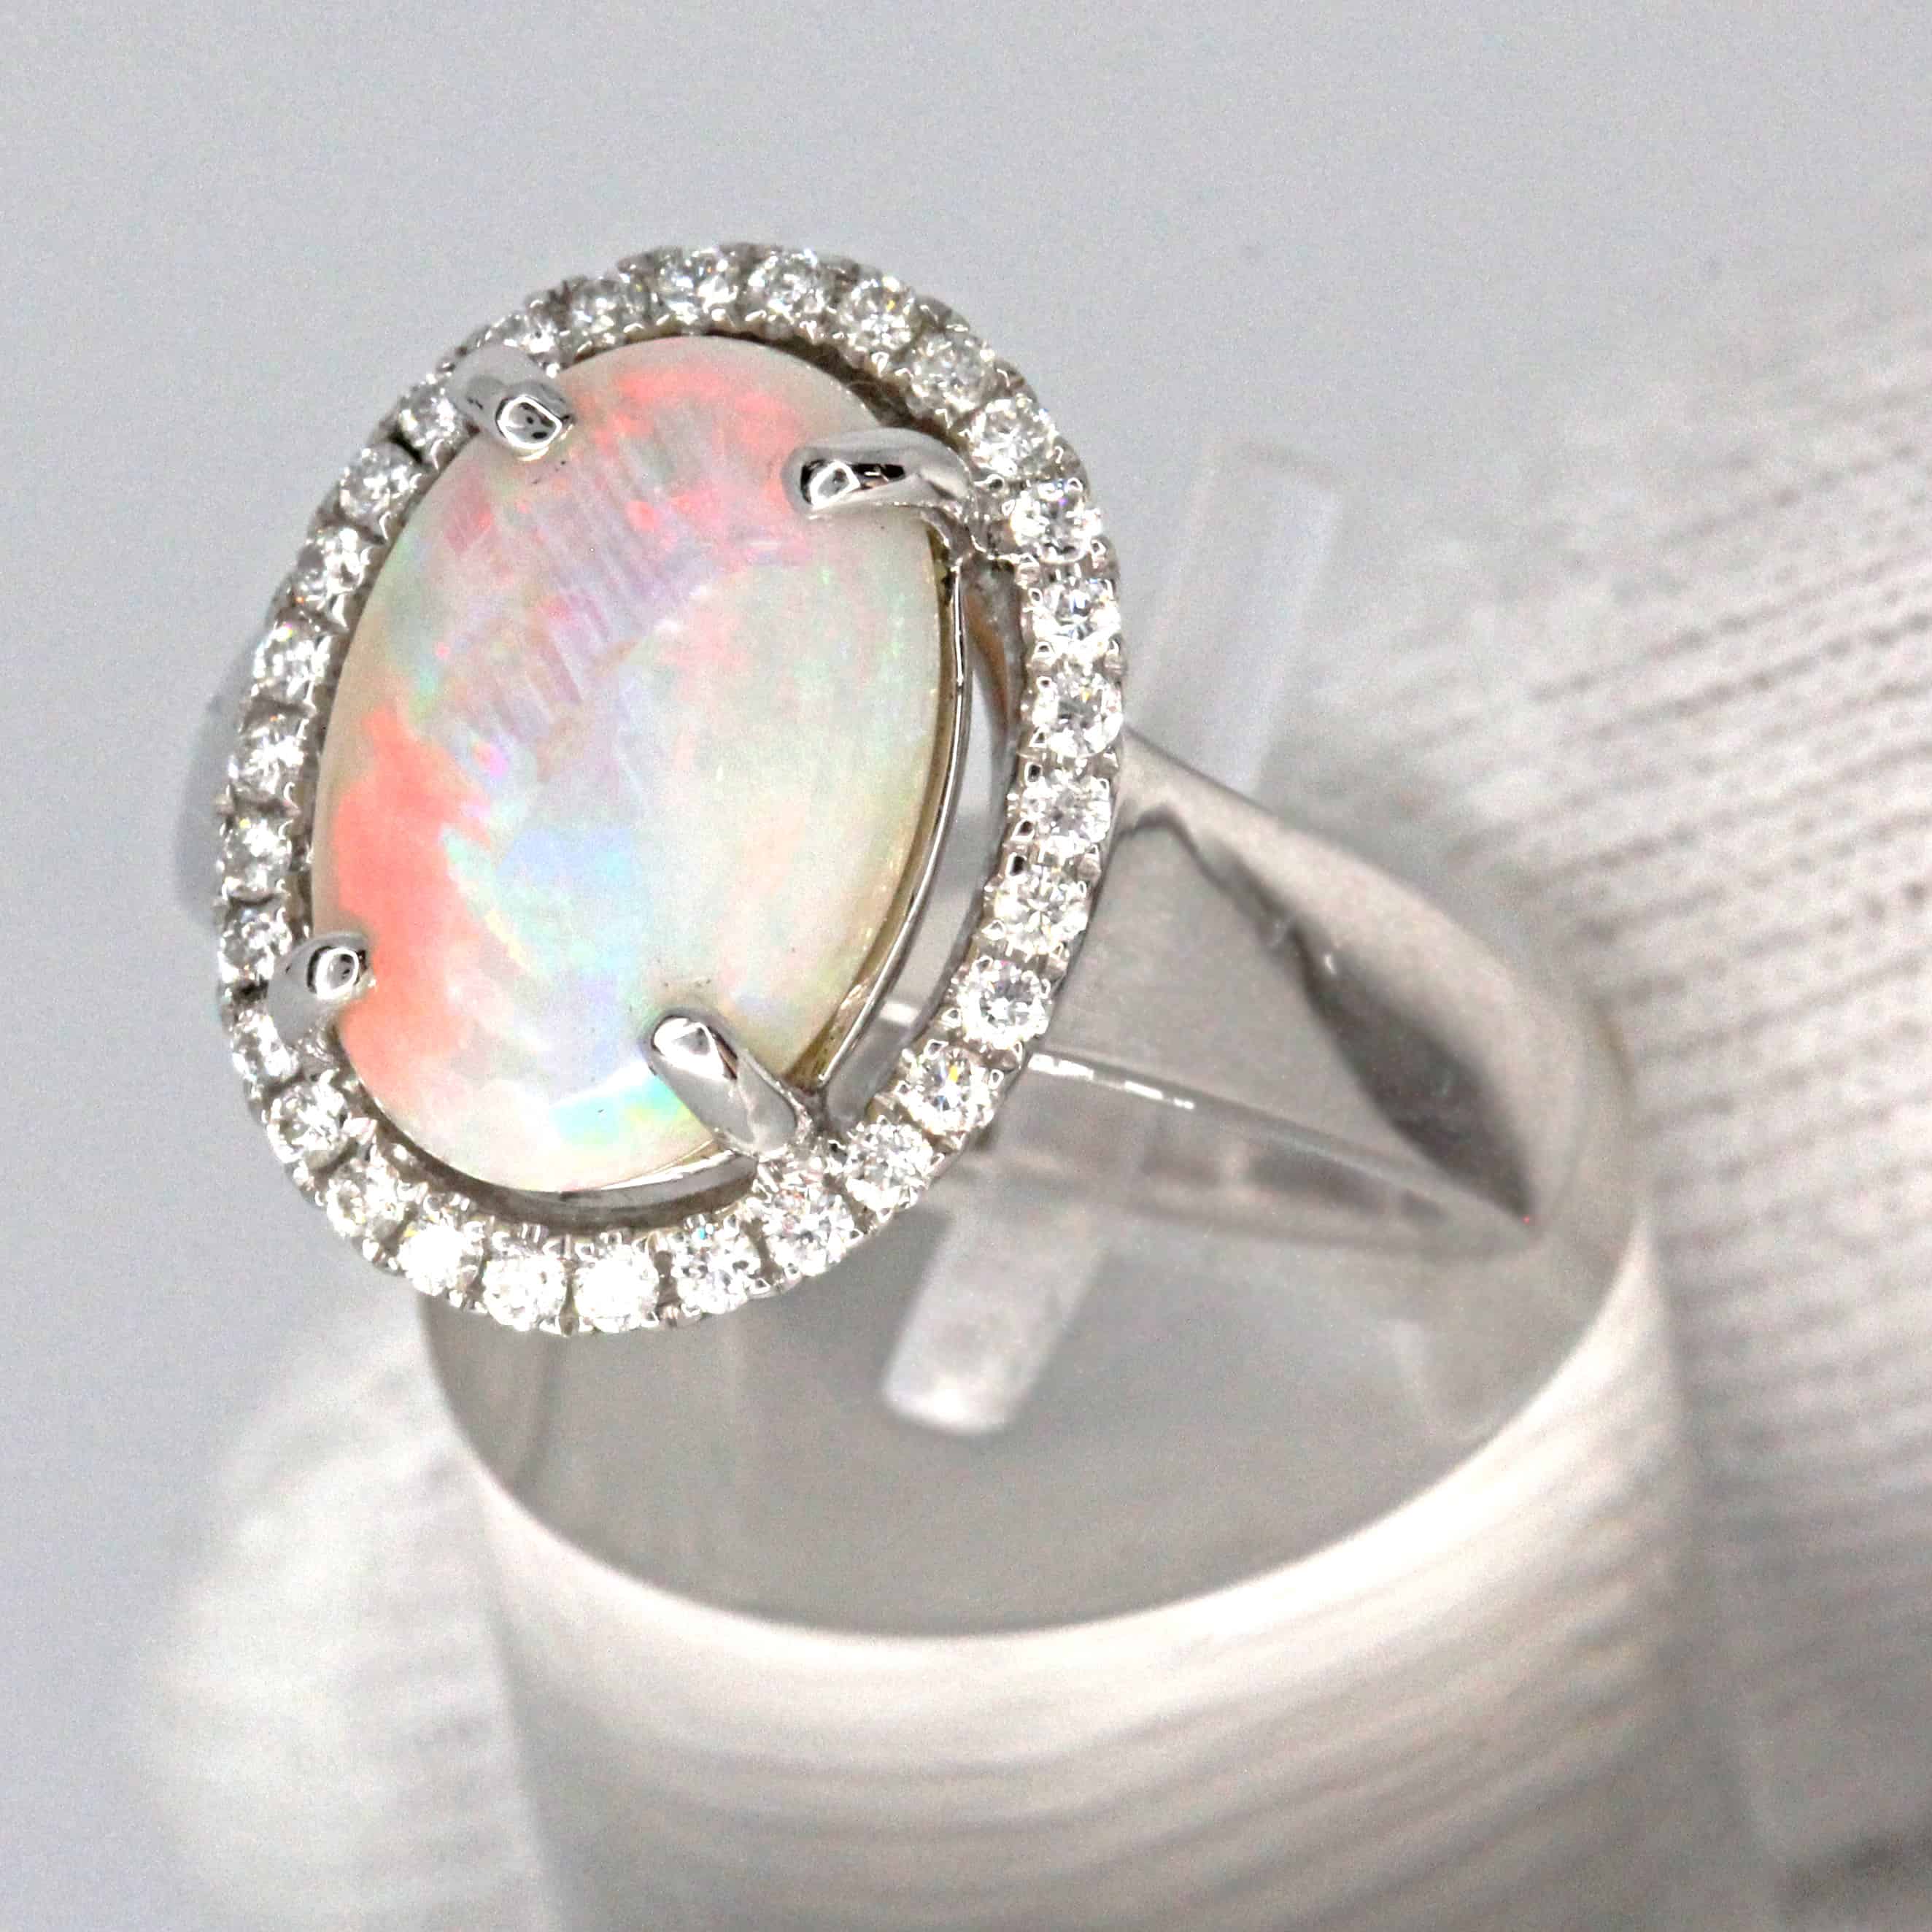 18ct White Gold Solid White Opal and Diamonds Ring | Allgem Jewellers